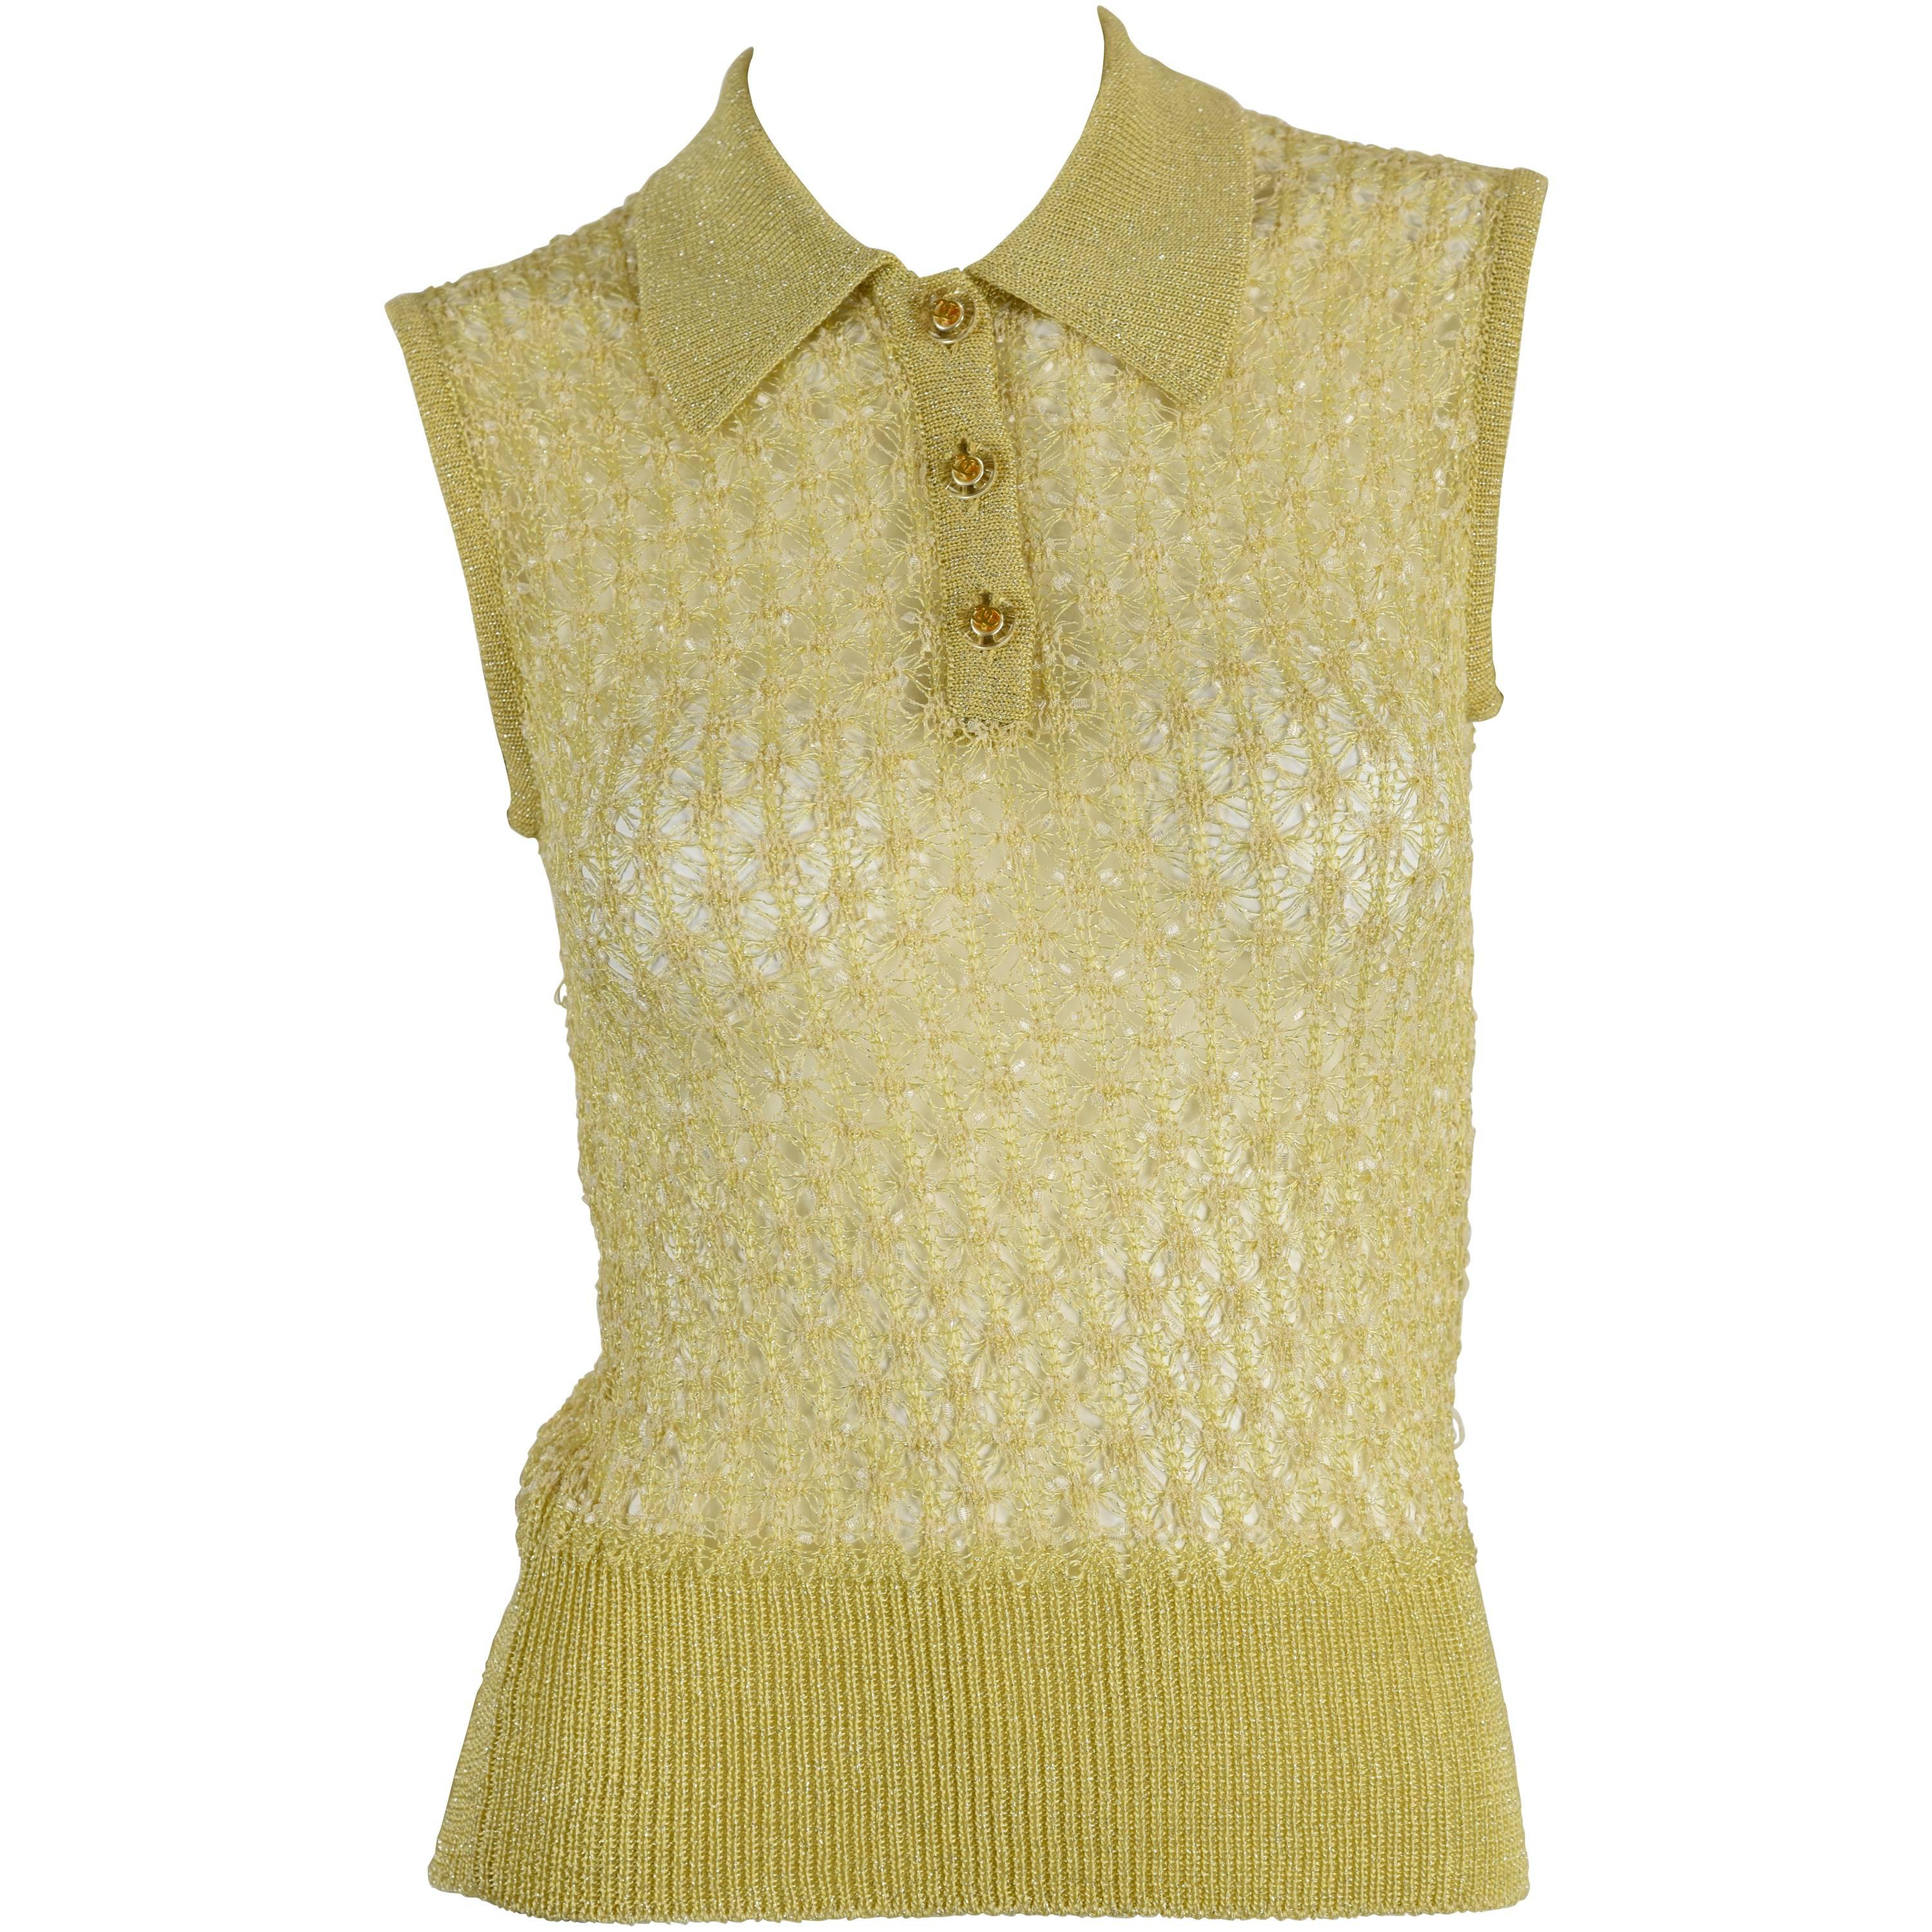 Chanel Boutique 1997P Gold/Metallic Crochet Sleeveless Top with Clear Buttons 42 For Sale